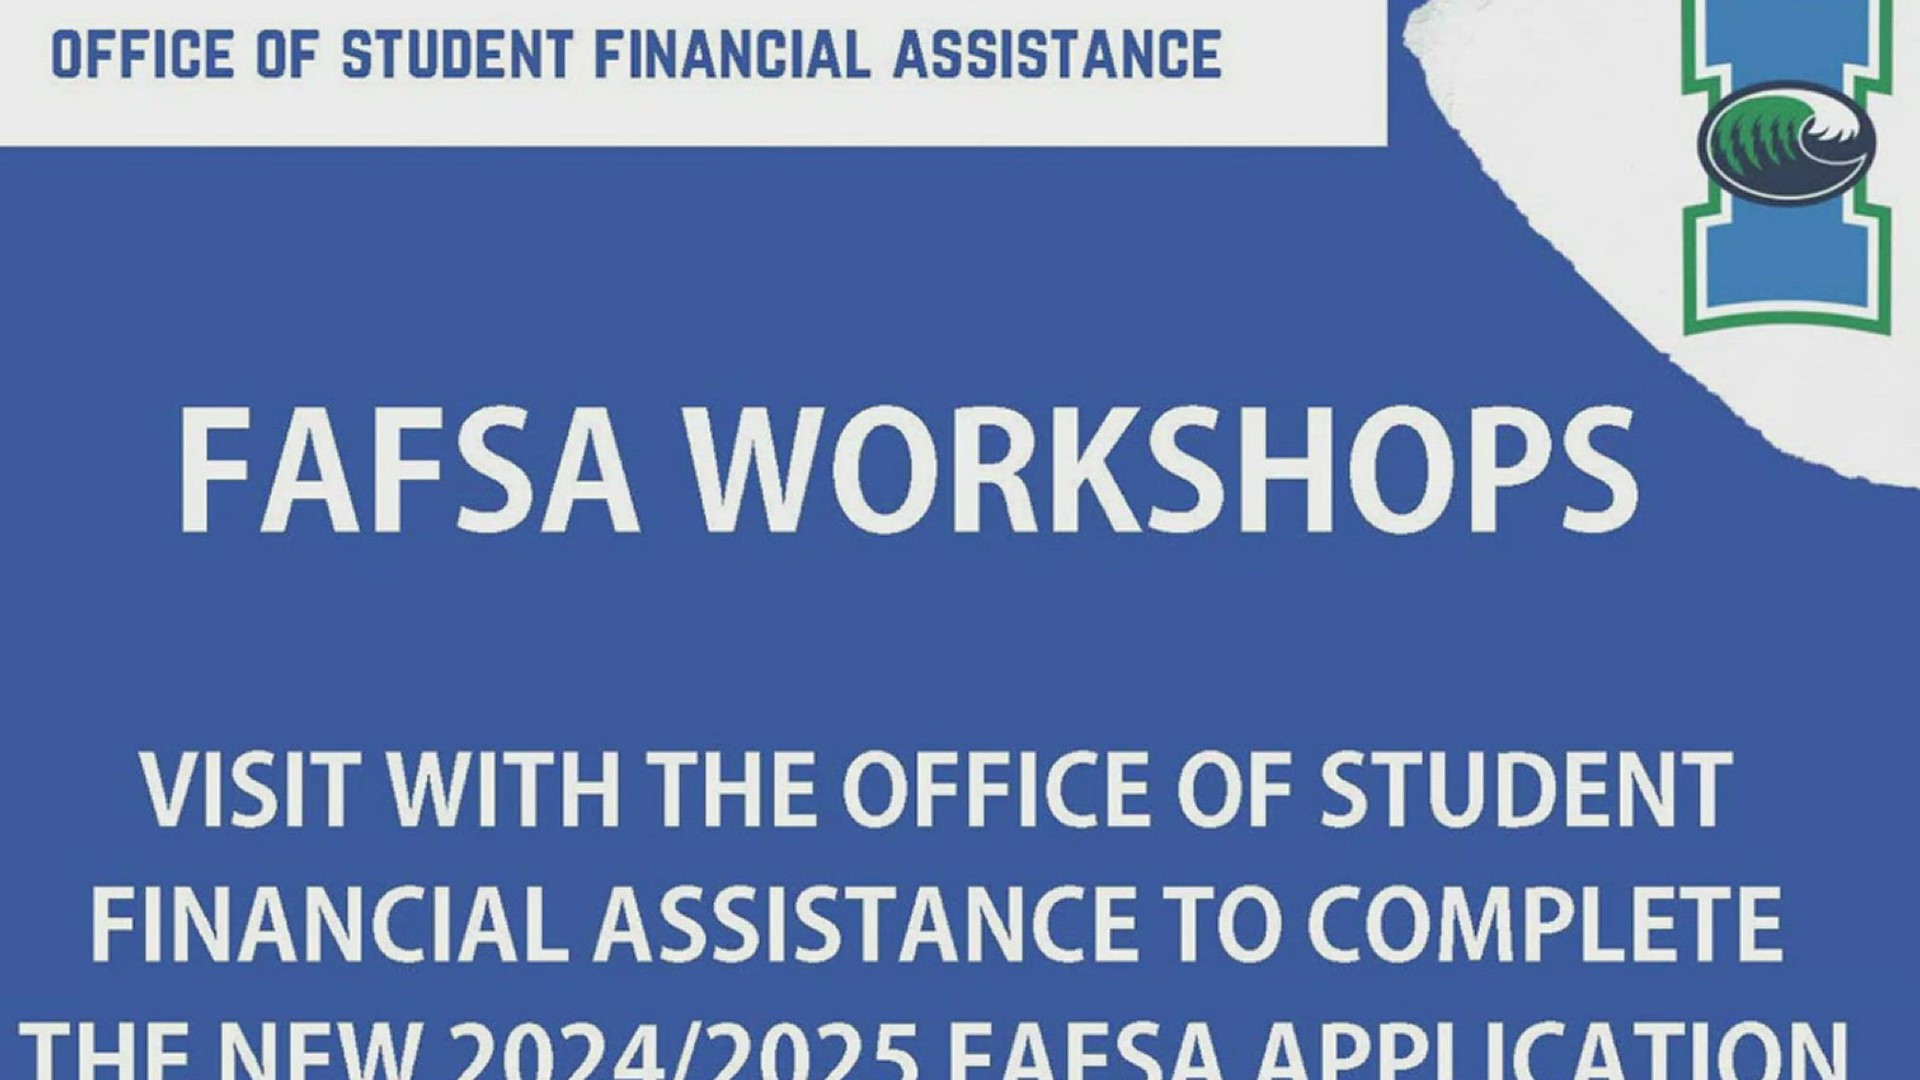 TAMU-CC financial aid specialist Margarita Aguero says FAFSA offers many opportunities for students to be awarded free money and apply for university scholarships!